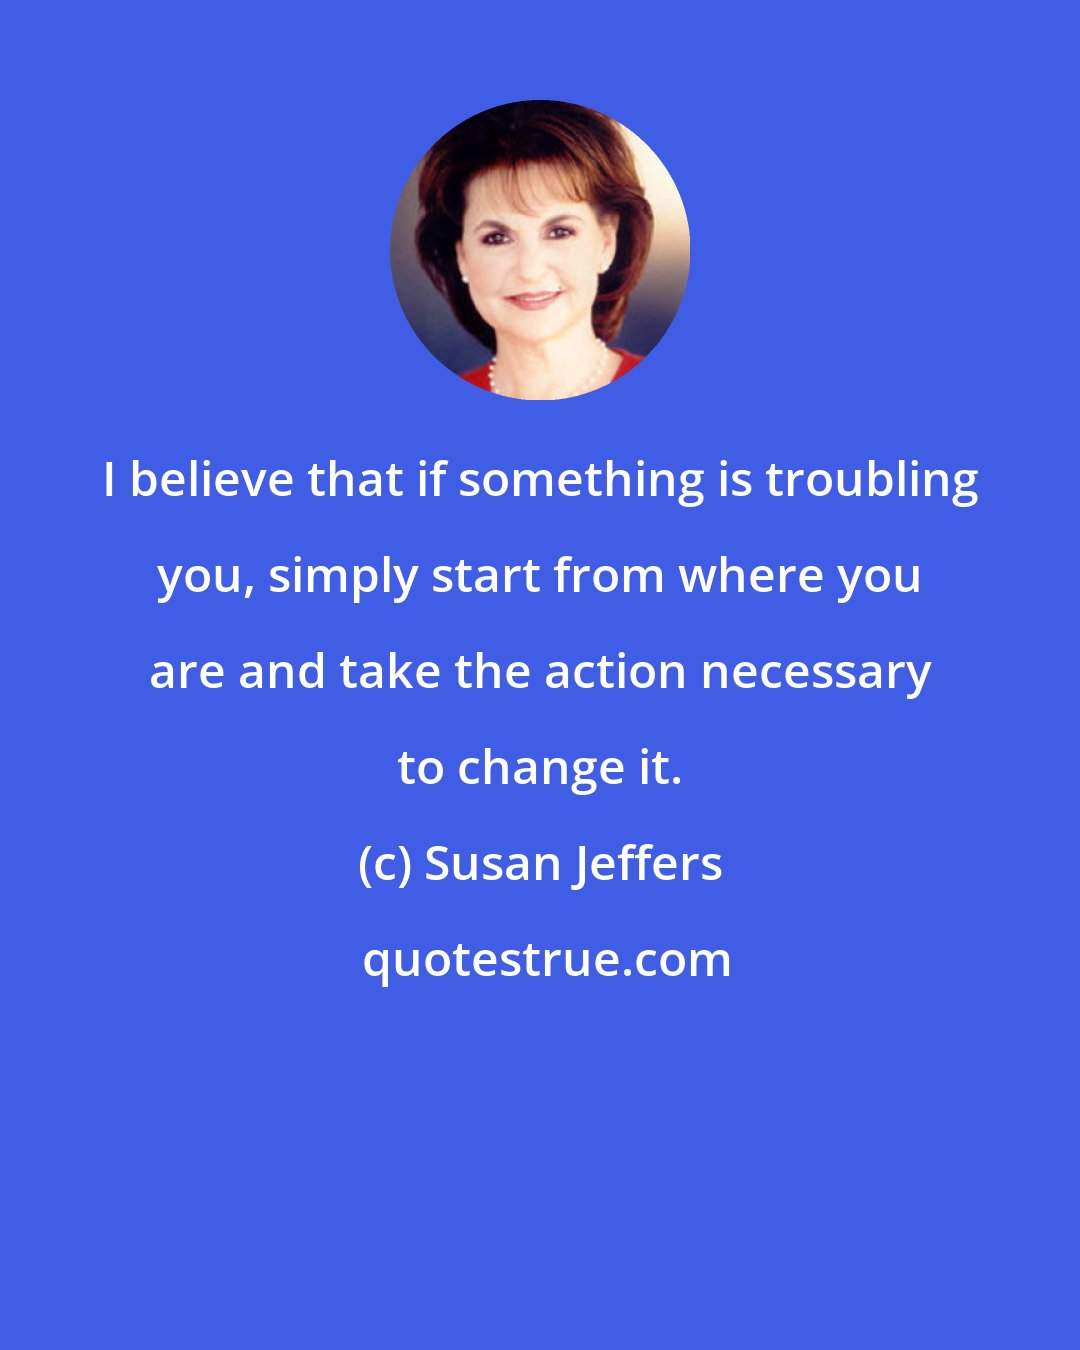 Susan Jeffers: I believe that if something is troubling you, simply start from where you are and take the action necessary to change it.